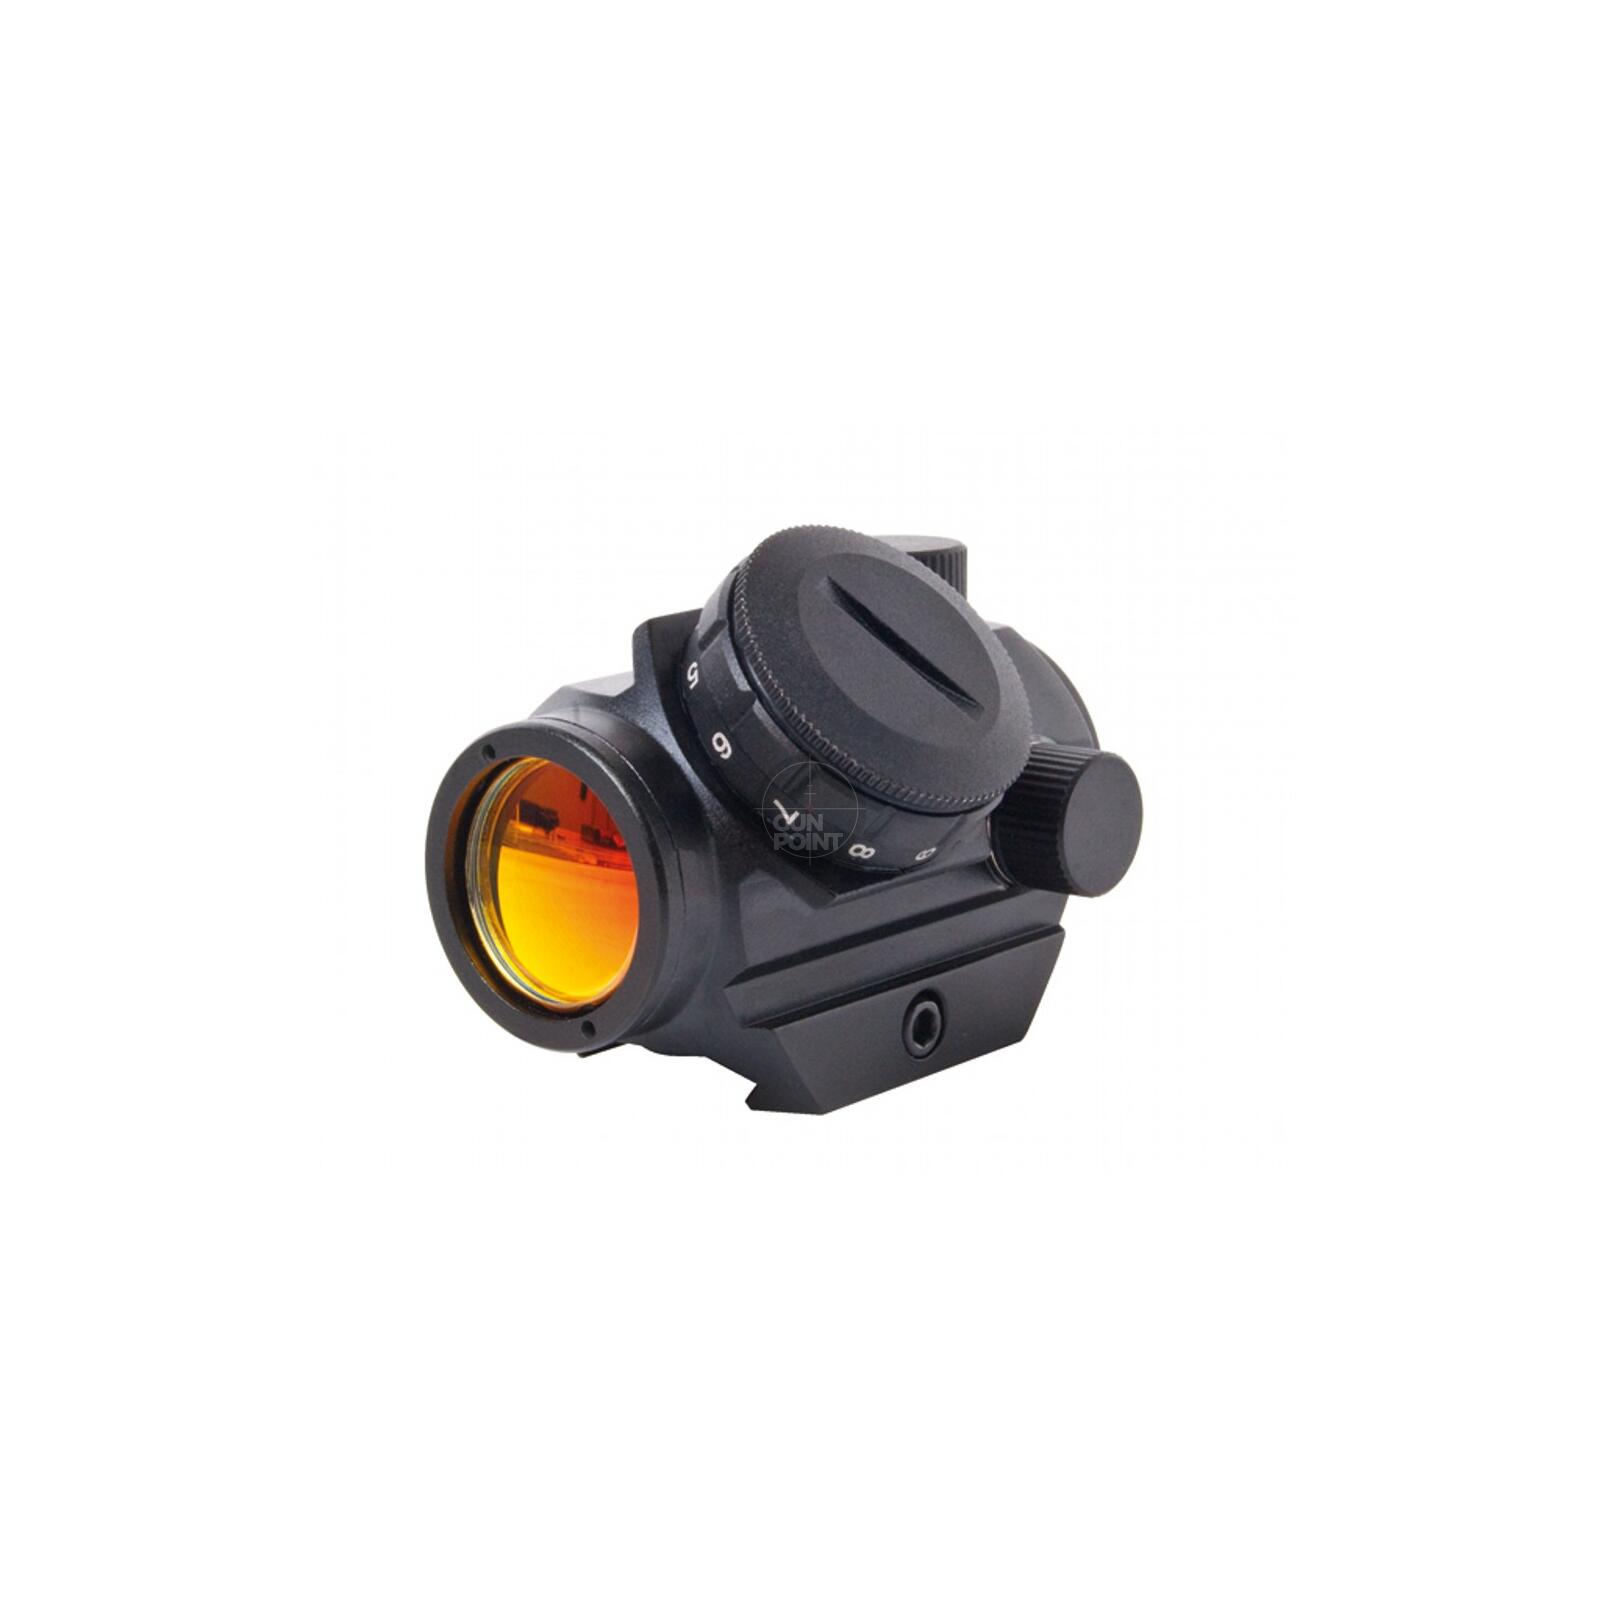 Swiss Arms Mini Red Dot Sight 11 Helligkeitsstufen